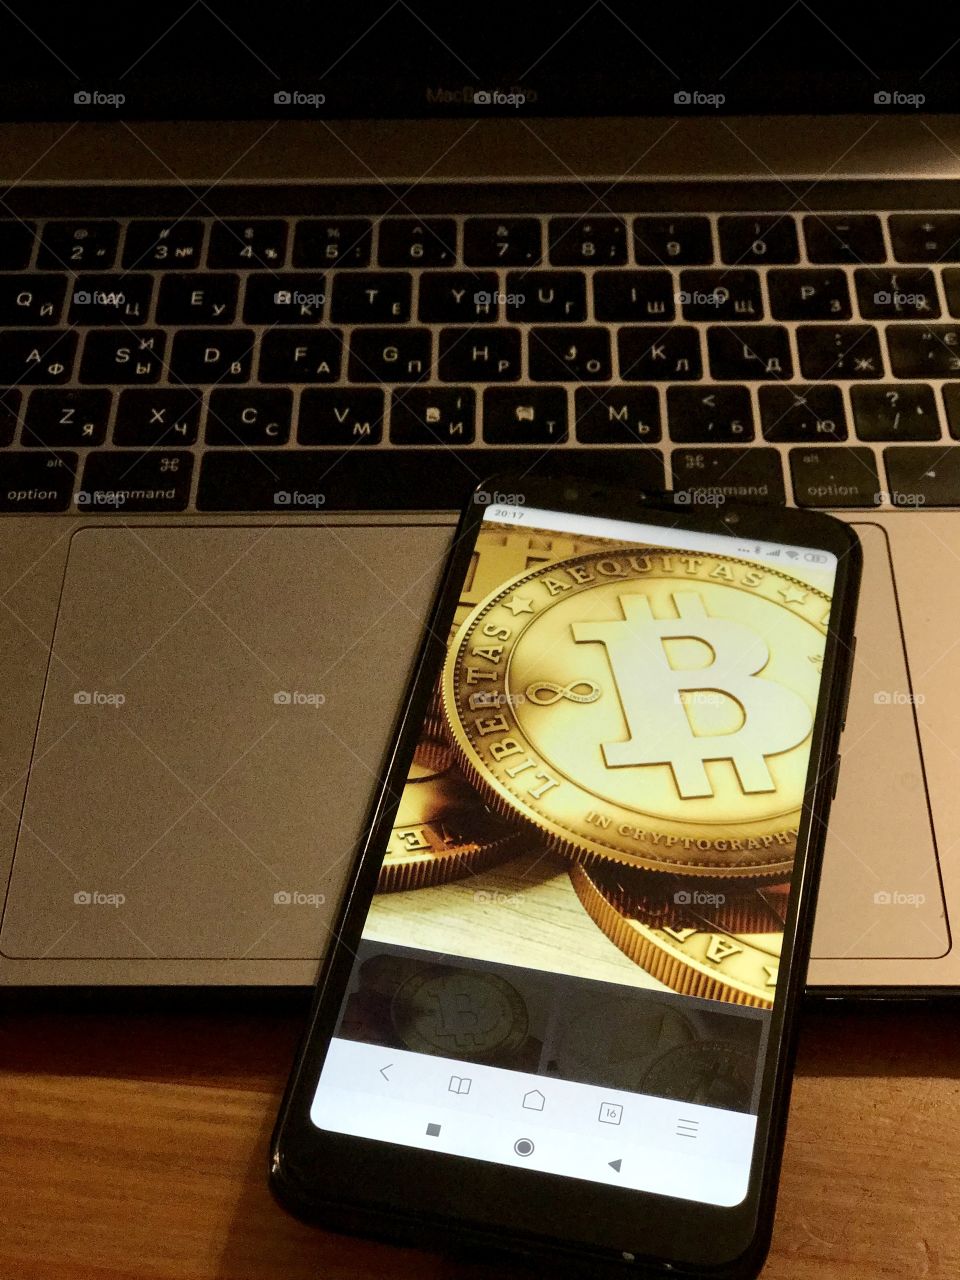 Mobile phone lies on the keyboard of the laptop, bitcoin symbols on the phone display.